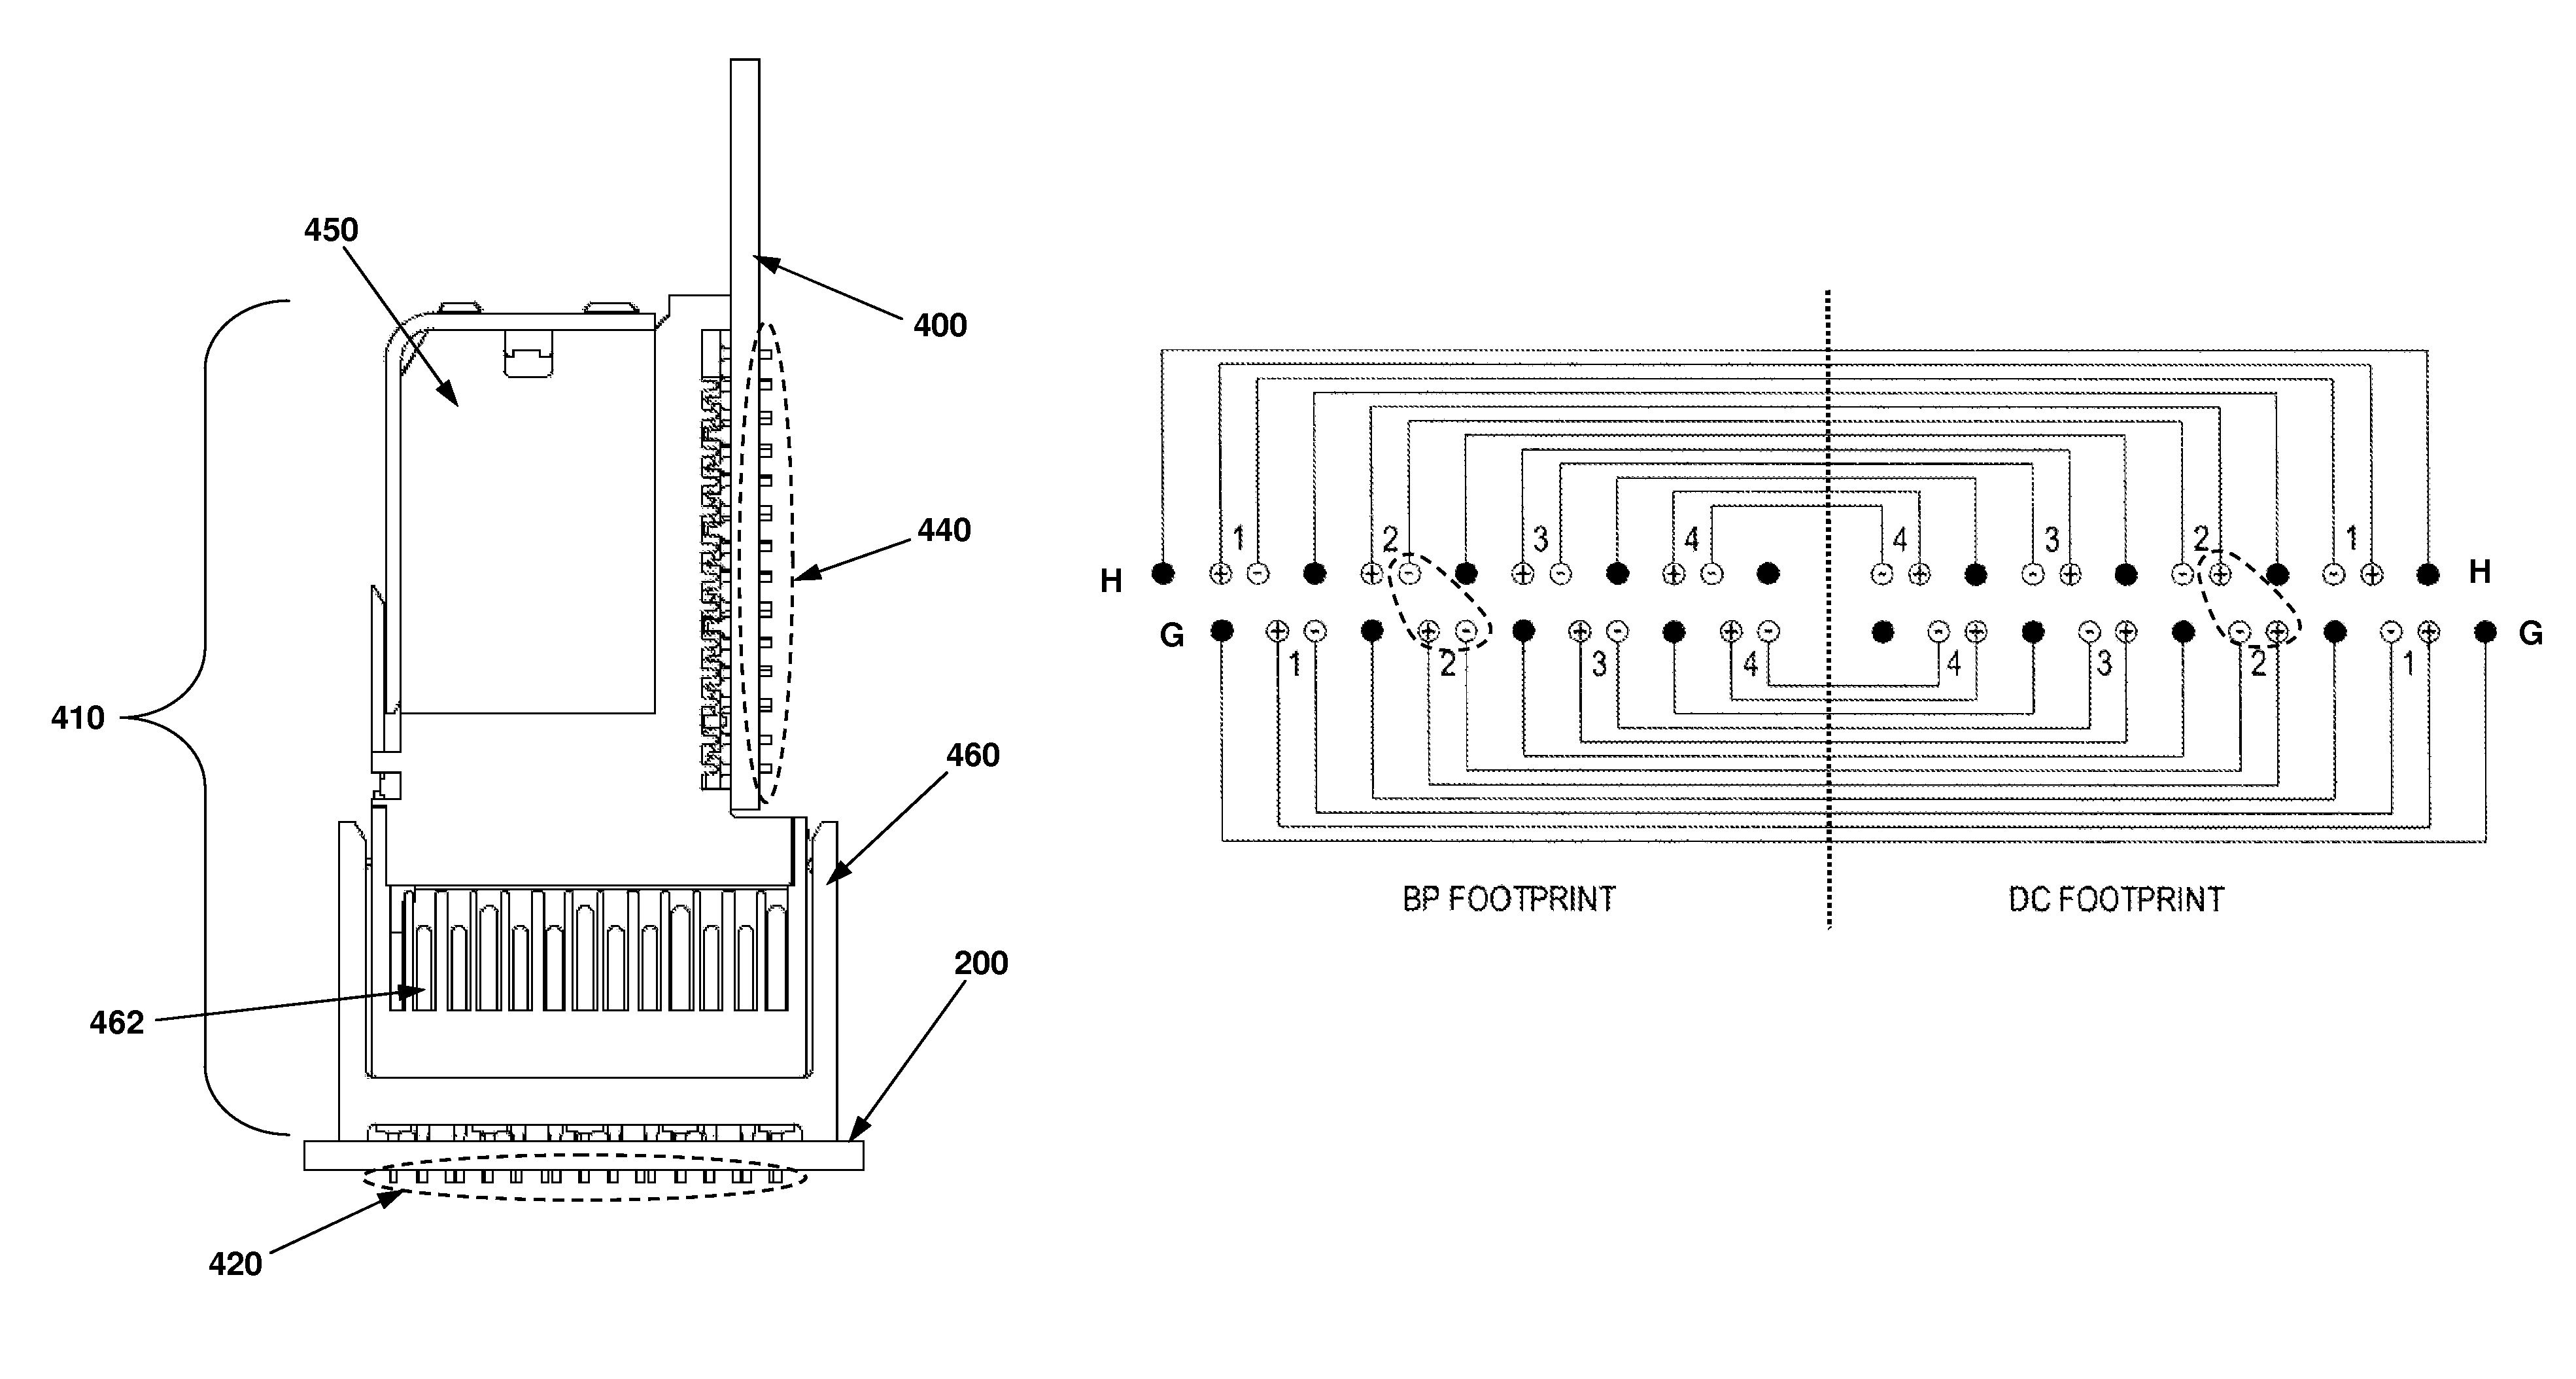 Connector assembly having adjacent differential signal pairs offset or of different polarity